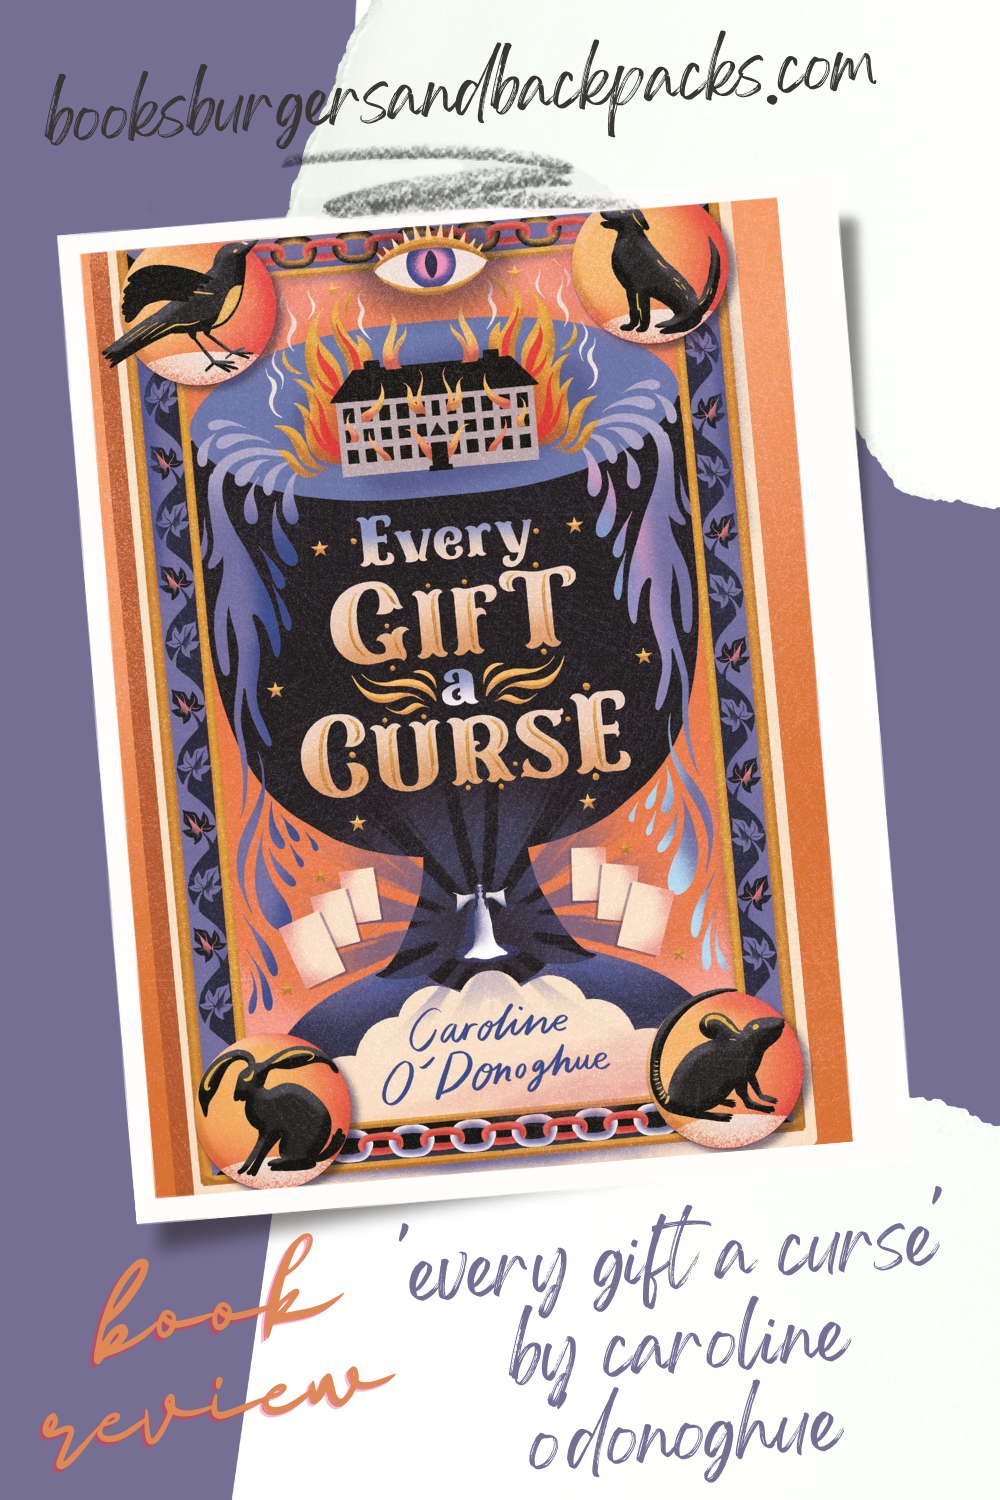 Every Gift a Curse [Book]